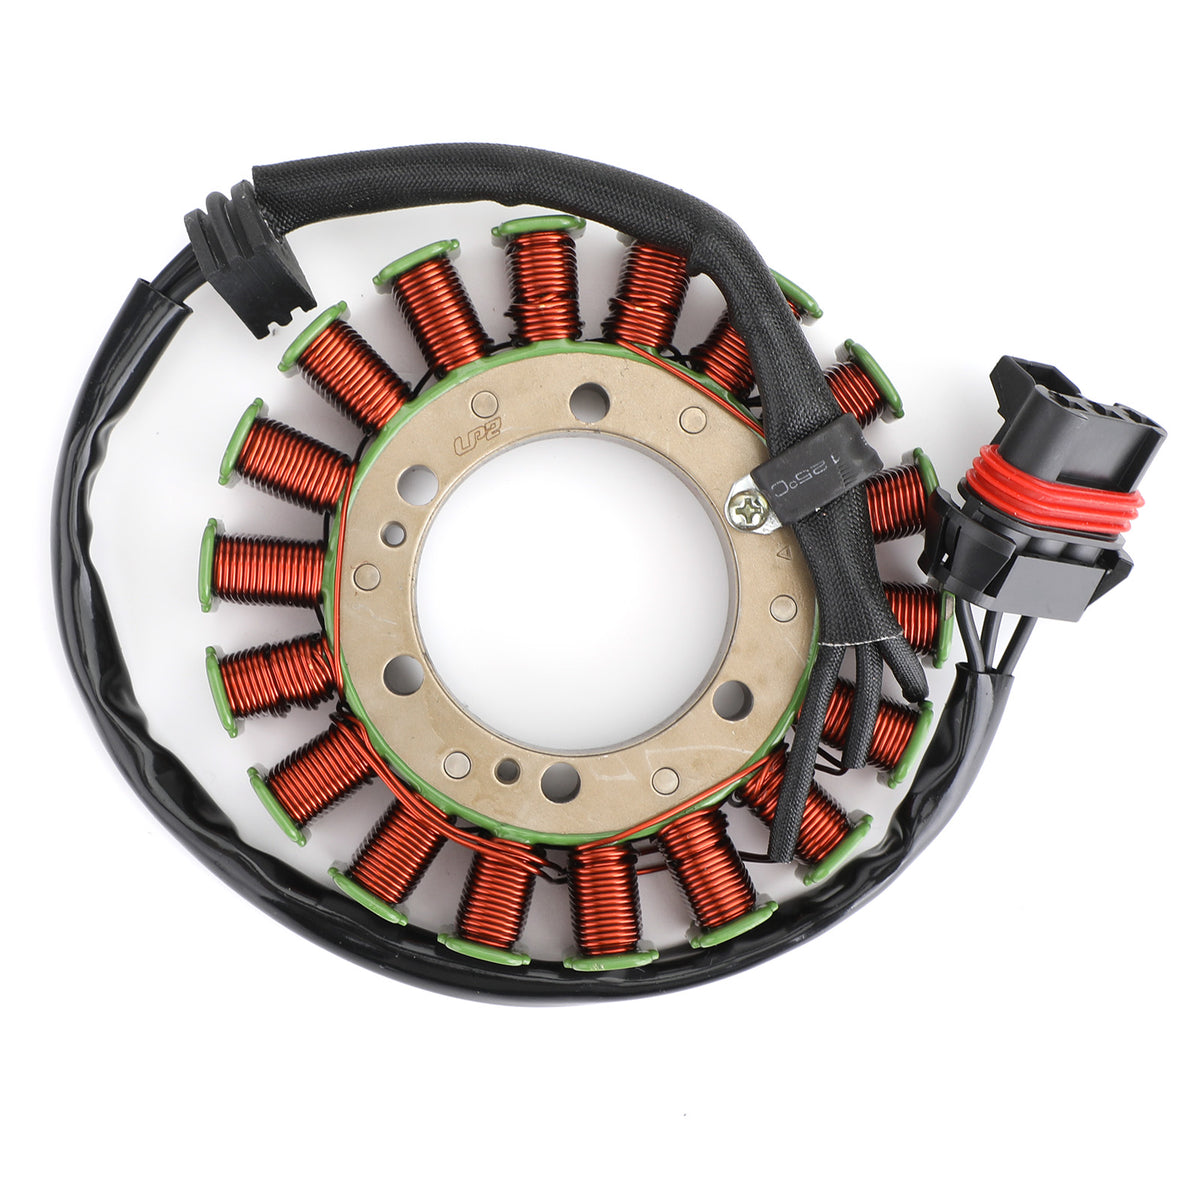 Stator Fit for Polaris ACE Ranger RZR 4 500 570 900 XP Crew 2015-2021 4014406 Fedex Express Shipping